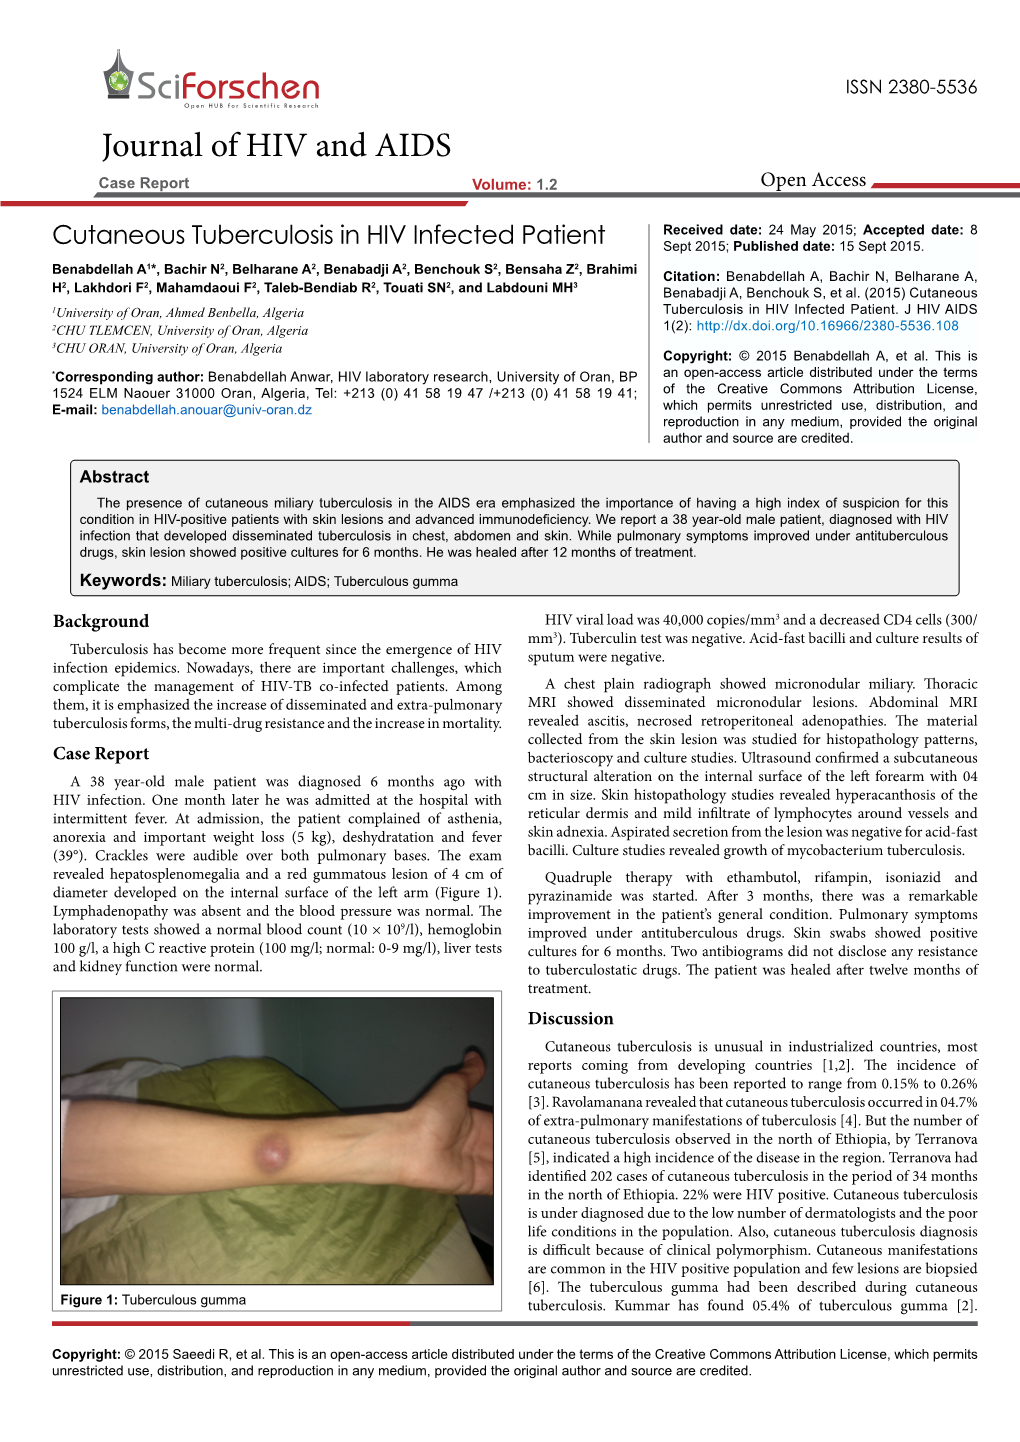 Cutaneous Tuberculosis in HIV Infected Patient Sept 2015; Published Date: 15 Sept 2015